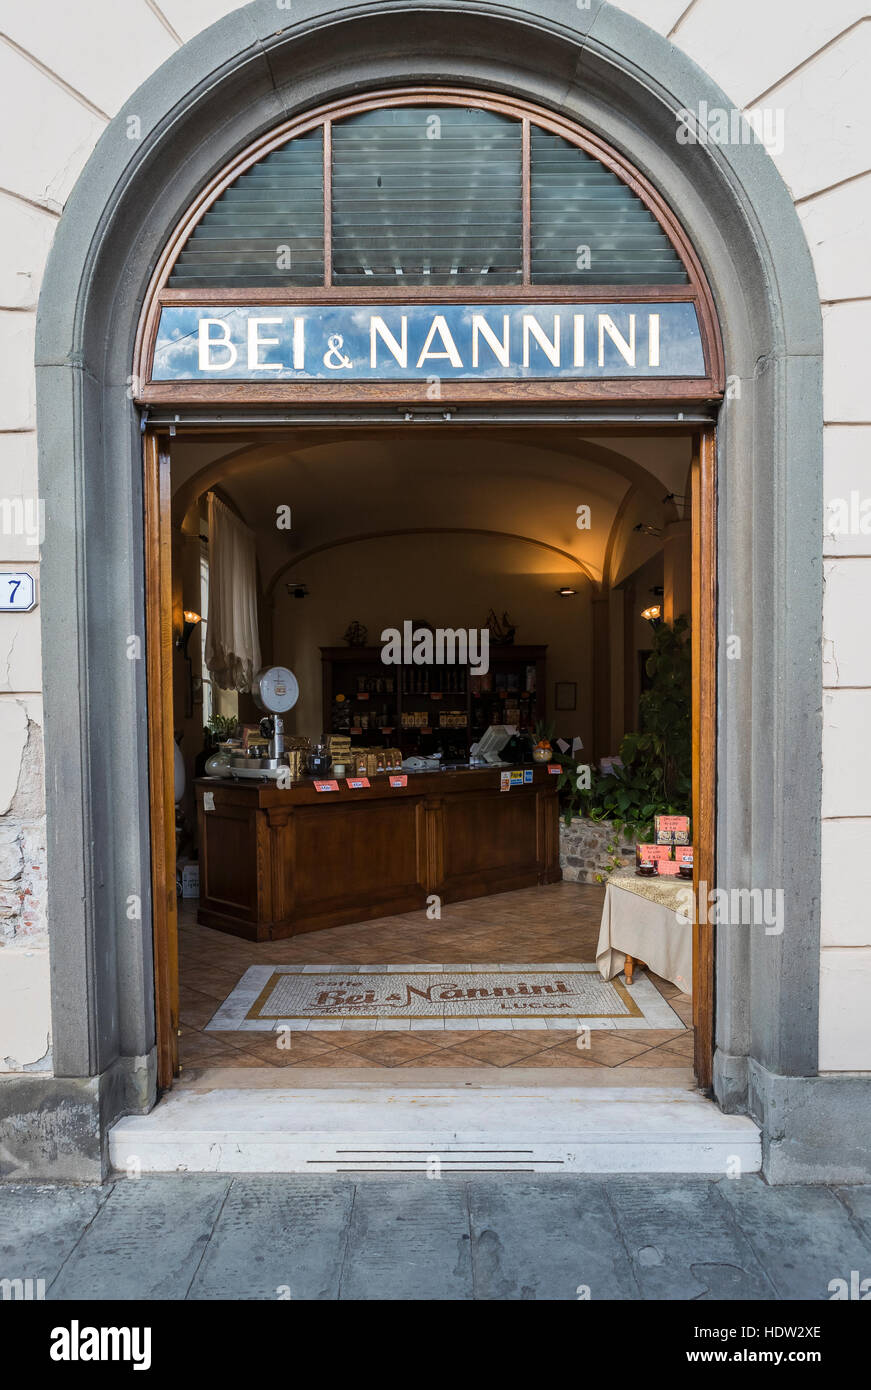 Bei & Nannini coffee. Lucca city street market stretches from the Porta  Santa Maria along the Via Borga Giannotti with everything from food to pets  Stock Photo - Alamy